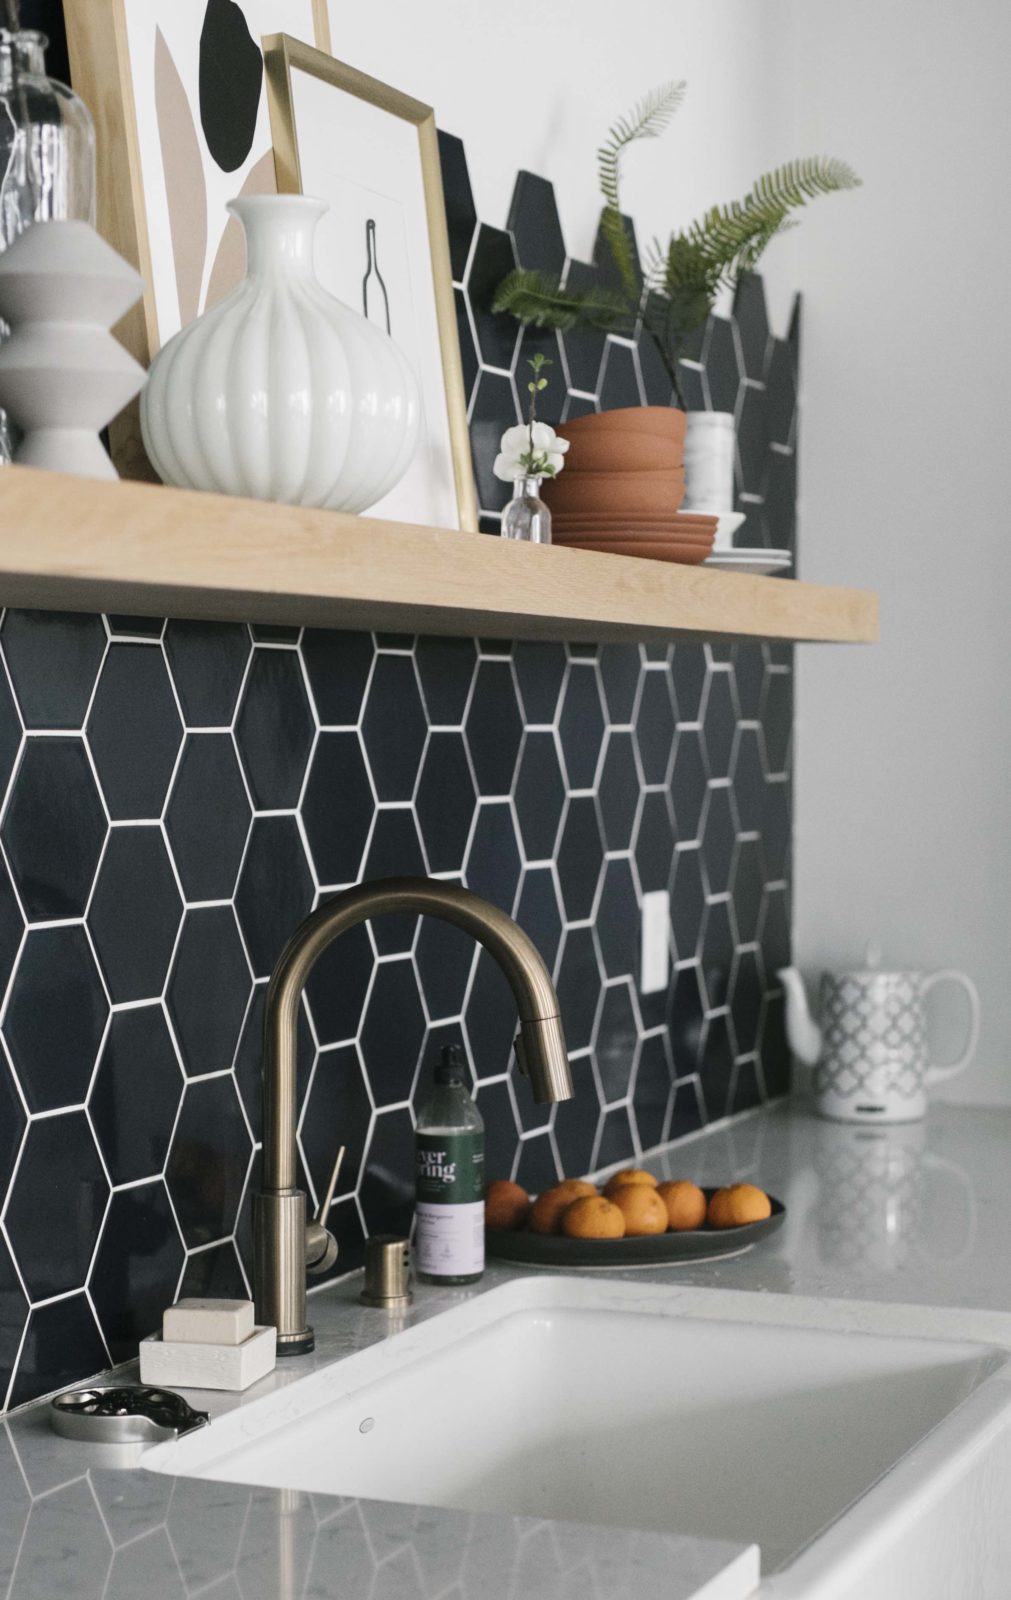 faucet and sink with modern tile backsplash in a kitchen